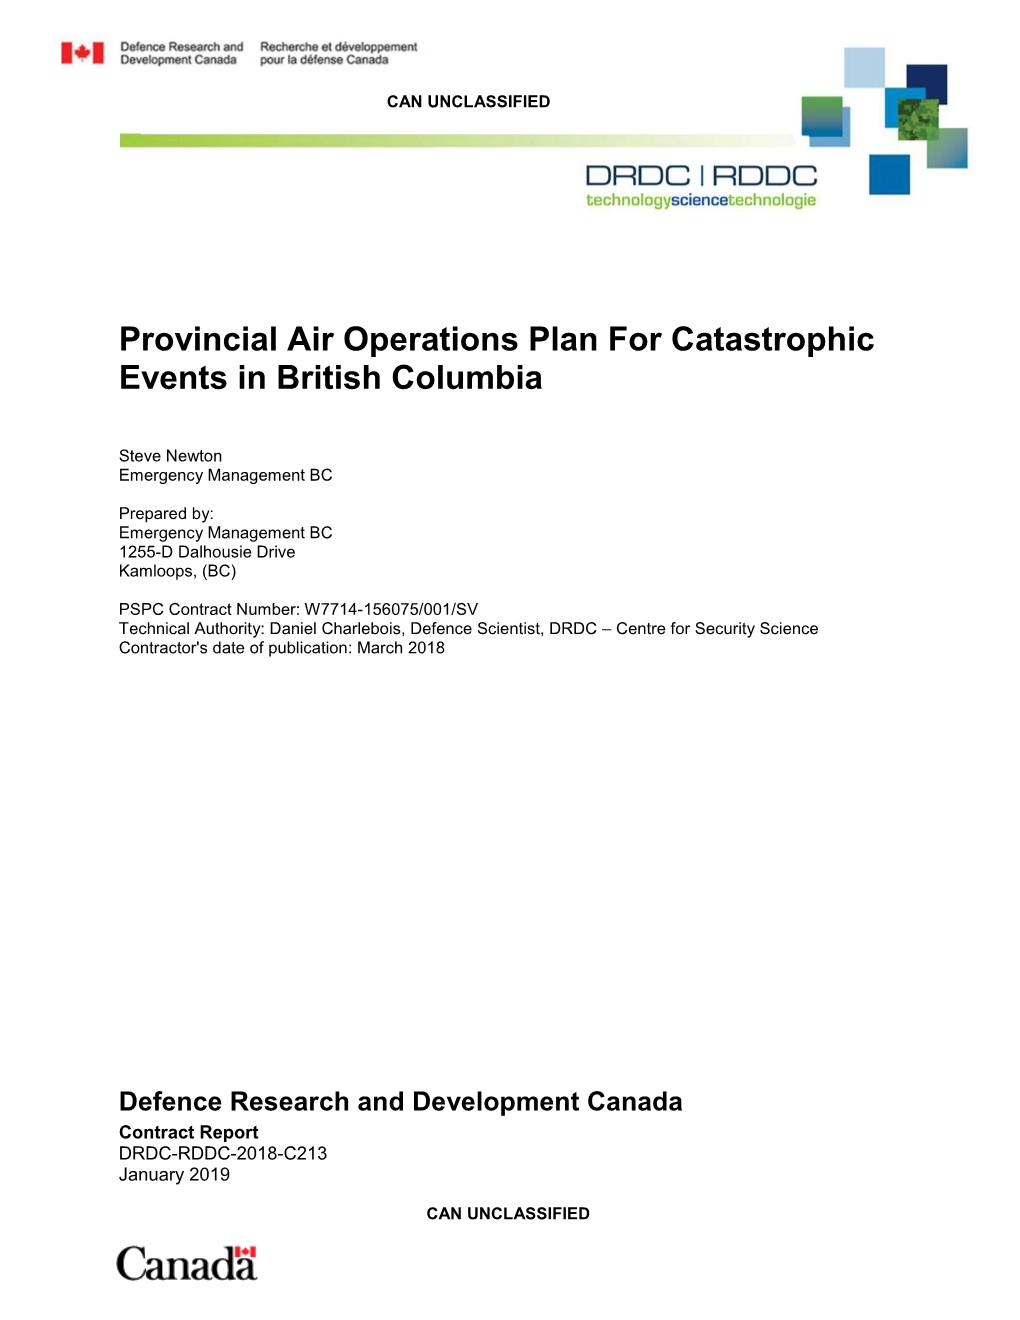 Provincial Air Operations Plan for Catastrophic Events in British Columbia